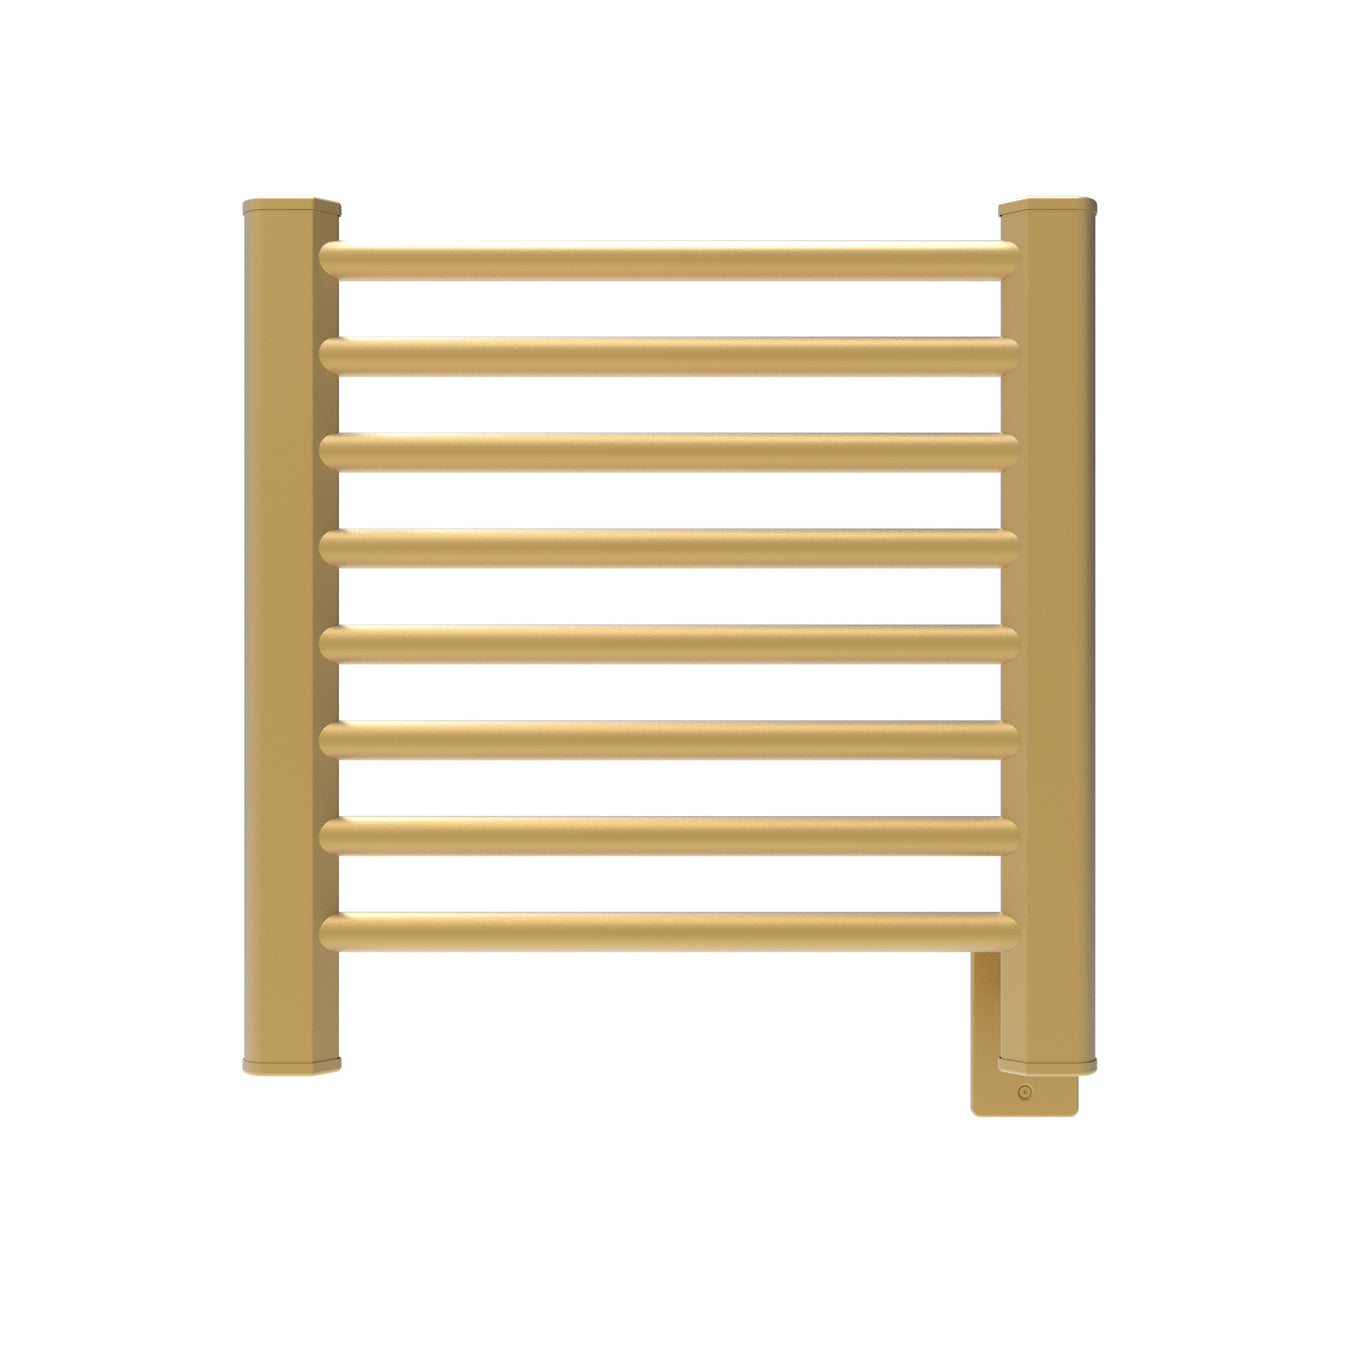 Amba Products Sirio Collection S2121 Towel Warmers